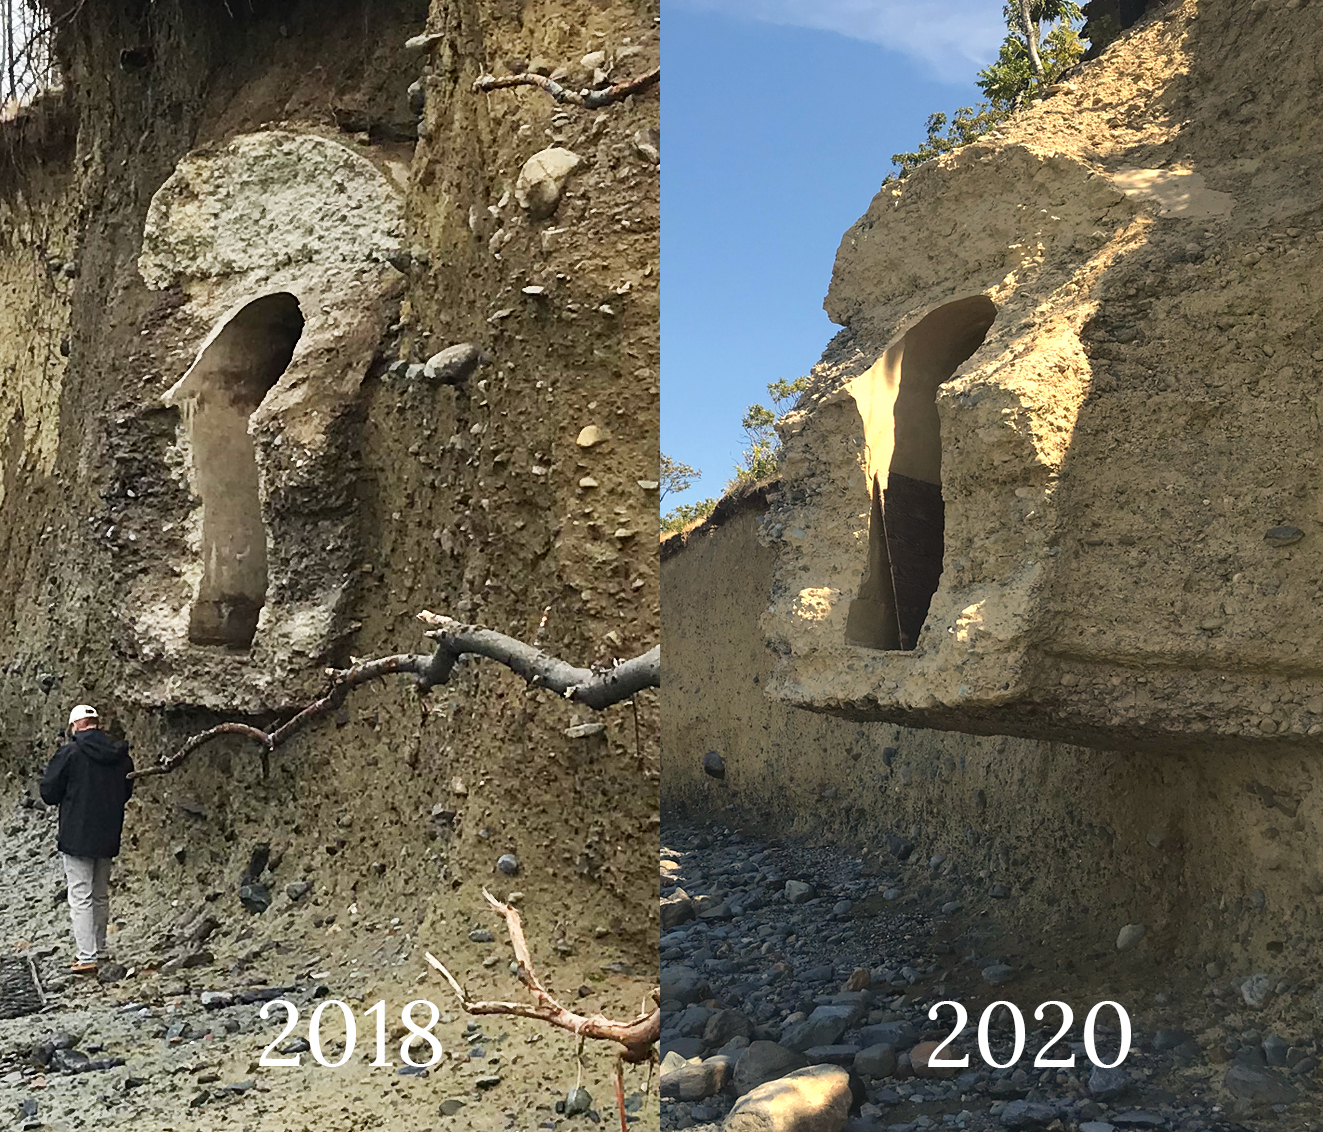 Side by side comparison of a 2018 and 2020 image showing exposure of historic structure on eroded cliff